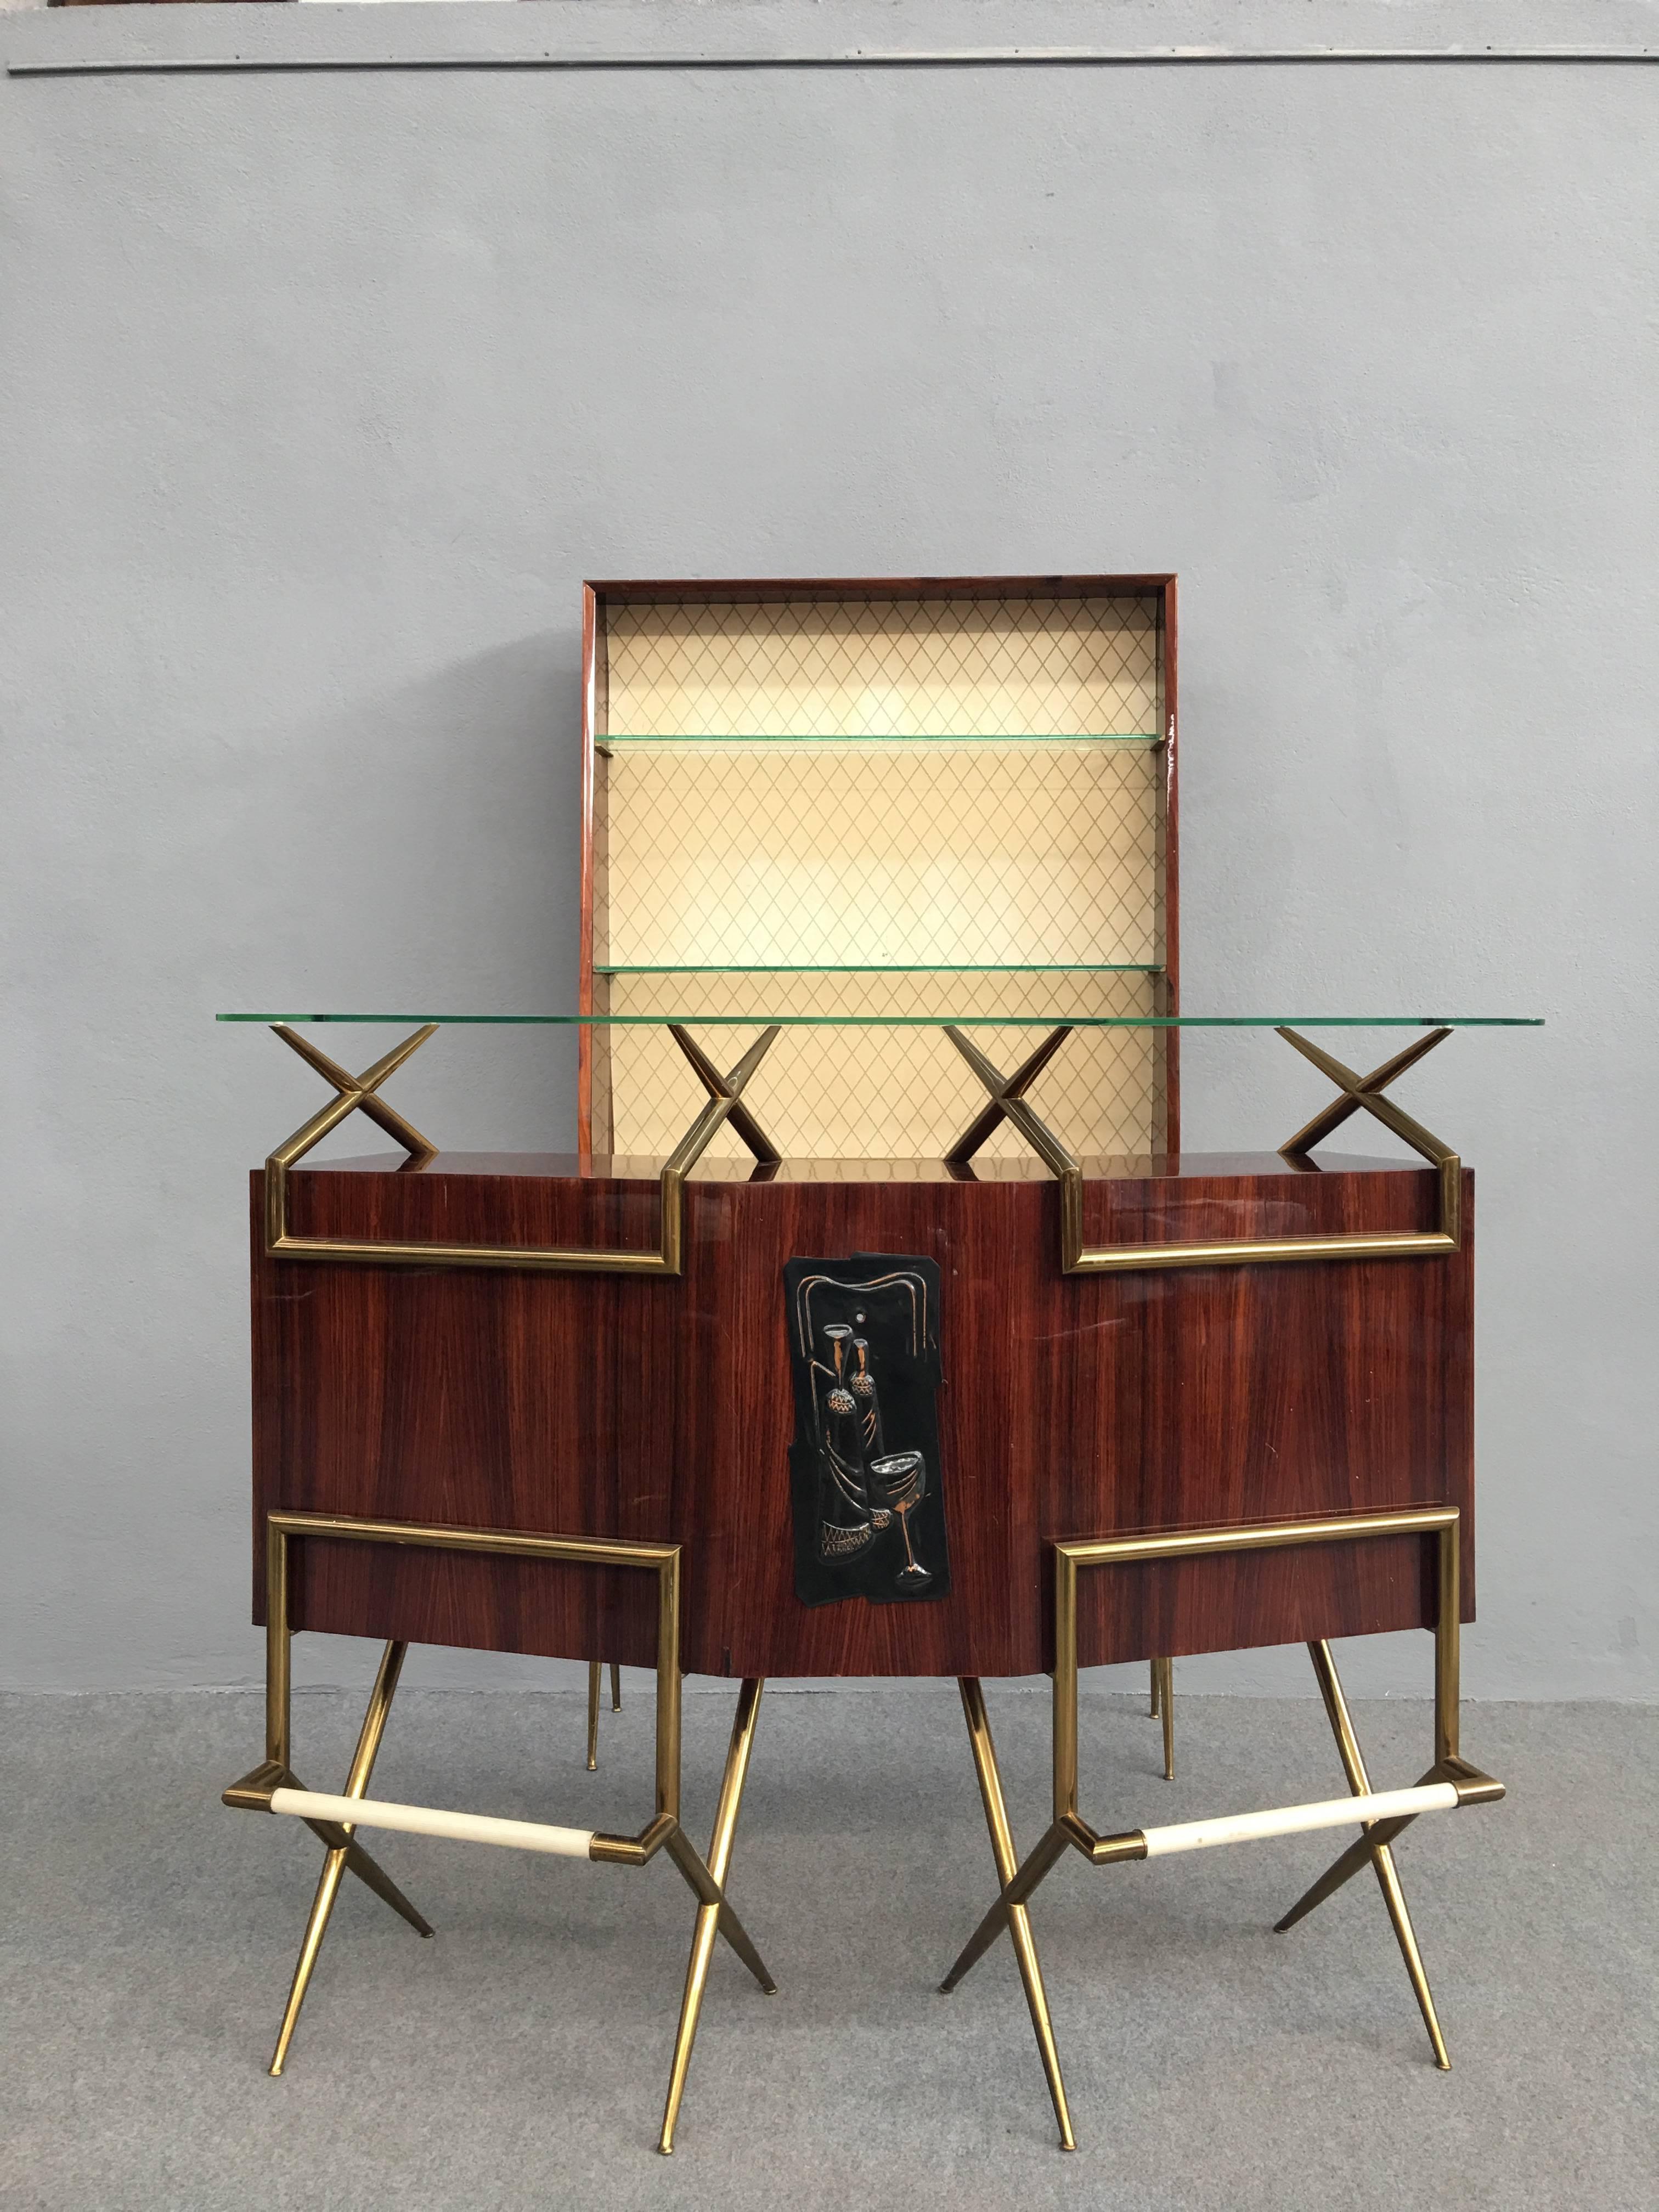 Mid-Century bar set: Standing bar, standalone case and two stools.
High gloss laquered mahogany, brass legs and glass top. Bronze art piece in the middle.
Open compartments and drawers.
Case piece with two shelves measures 180cm height, depth 25